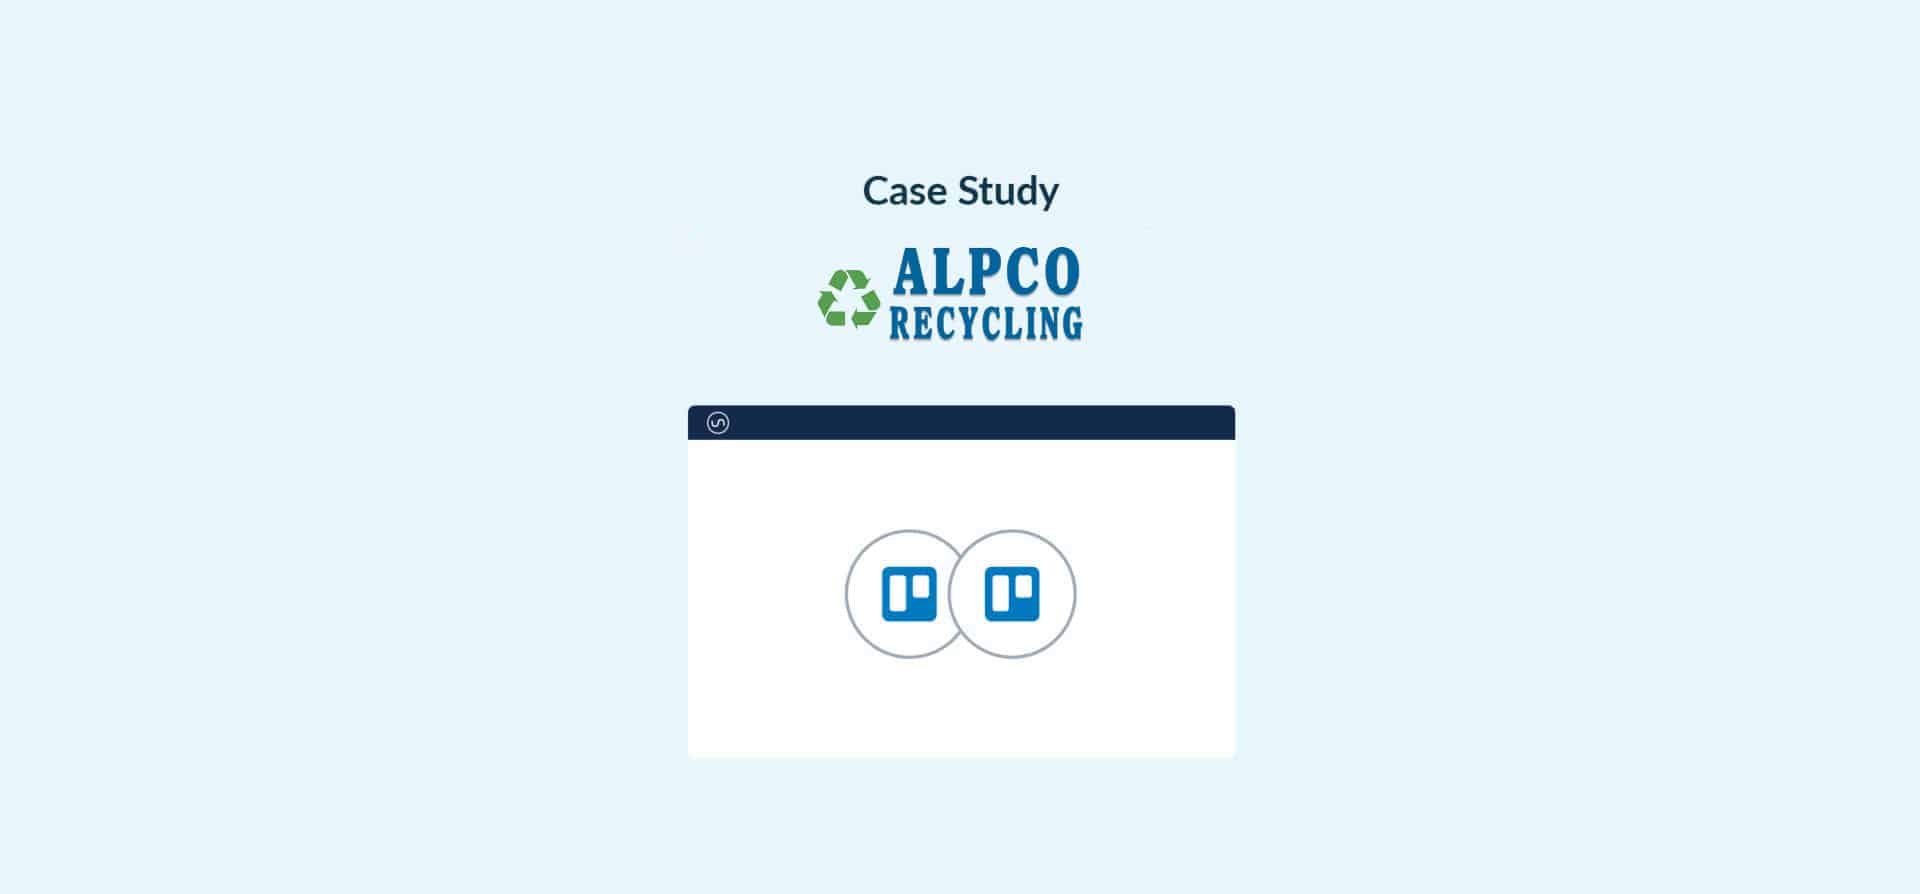 Logos for Trello and Alpco Recycling, representing the Alpco Recycling case study